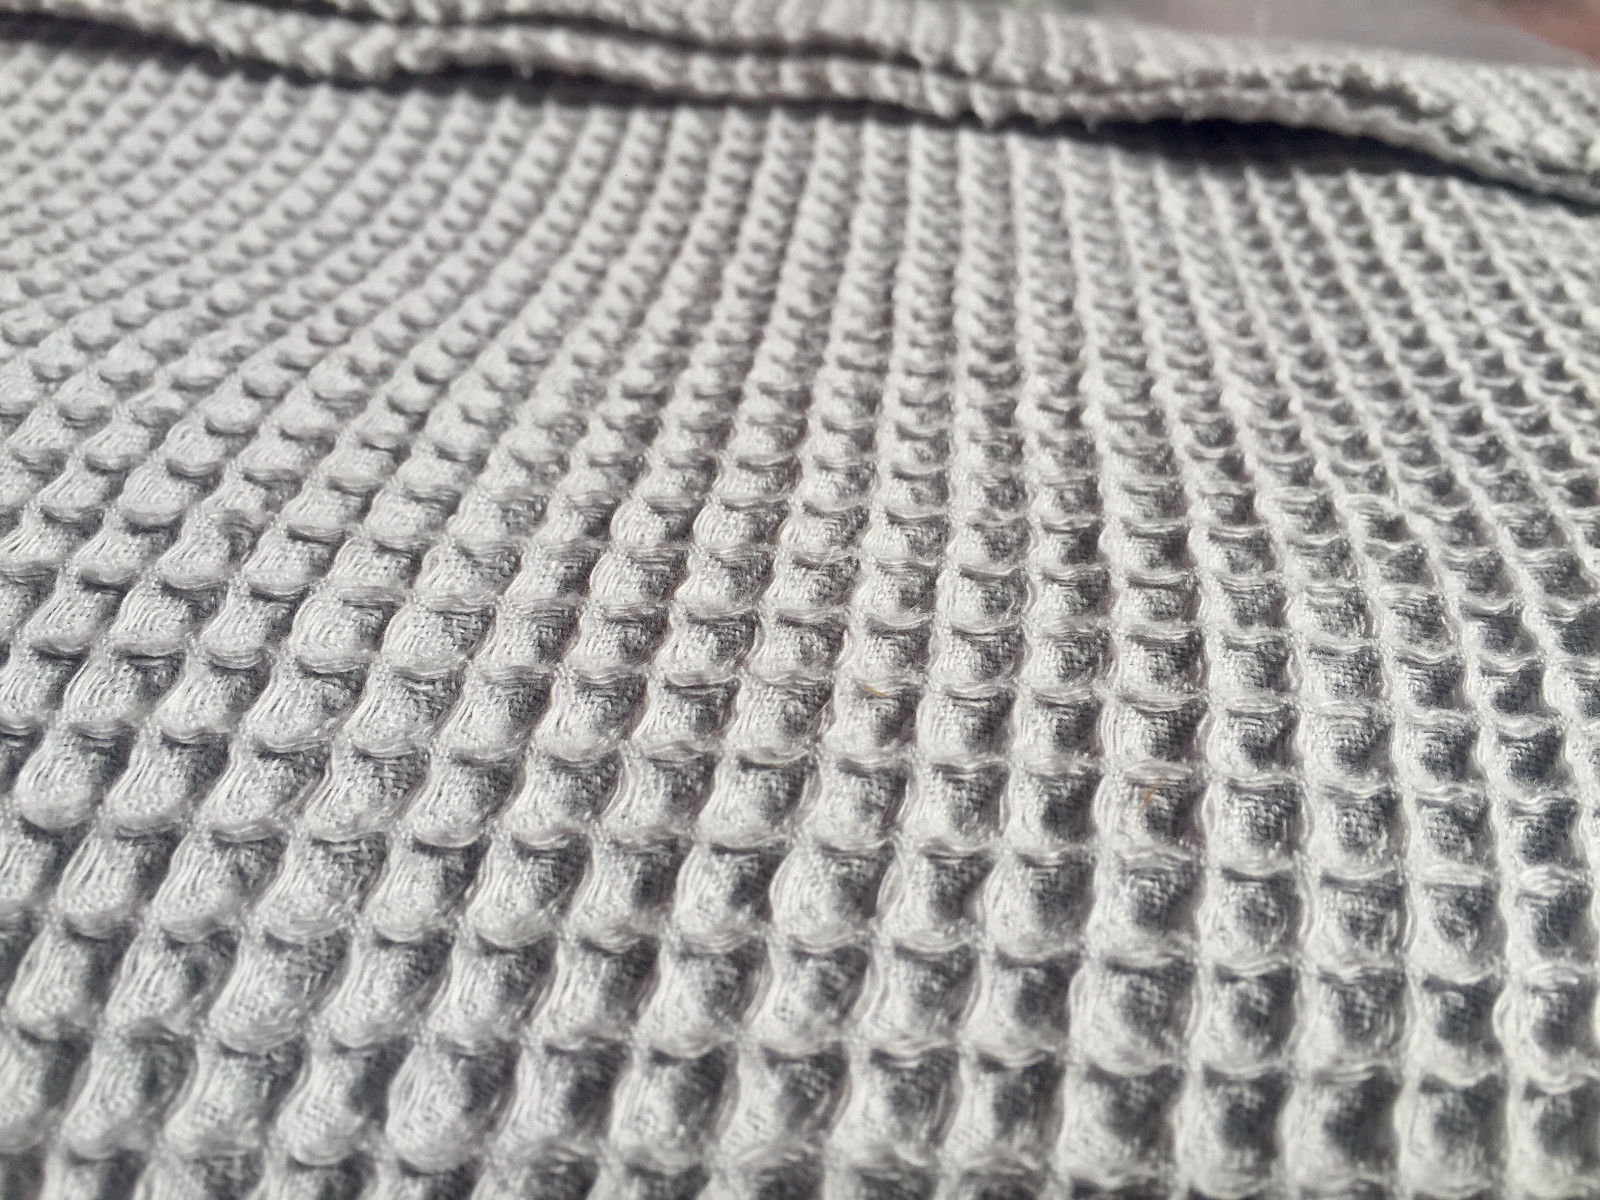 https://lushfabric.com/wp-content/uploads/2020/08/cotton-waffle-pique-honeycomb-fabric-material-bathrobe-gown-towel-cushion-150cm-wide-silver-grey-5f3a929a.jpg